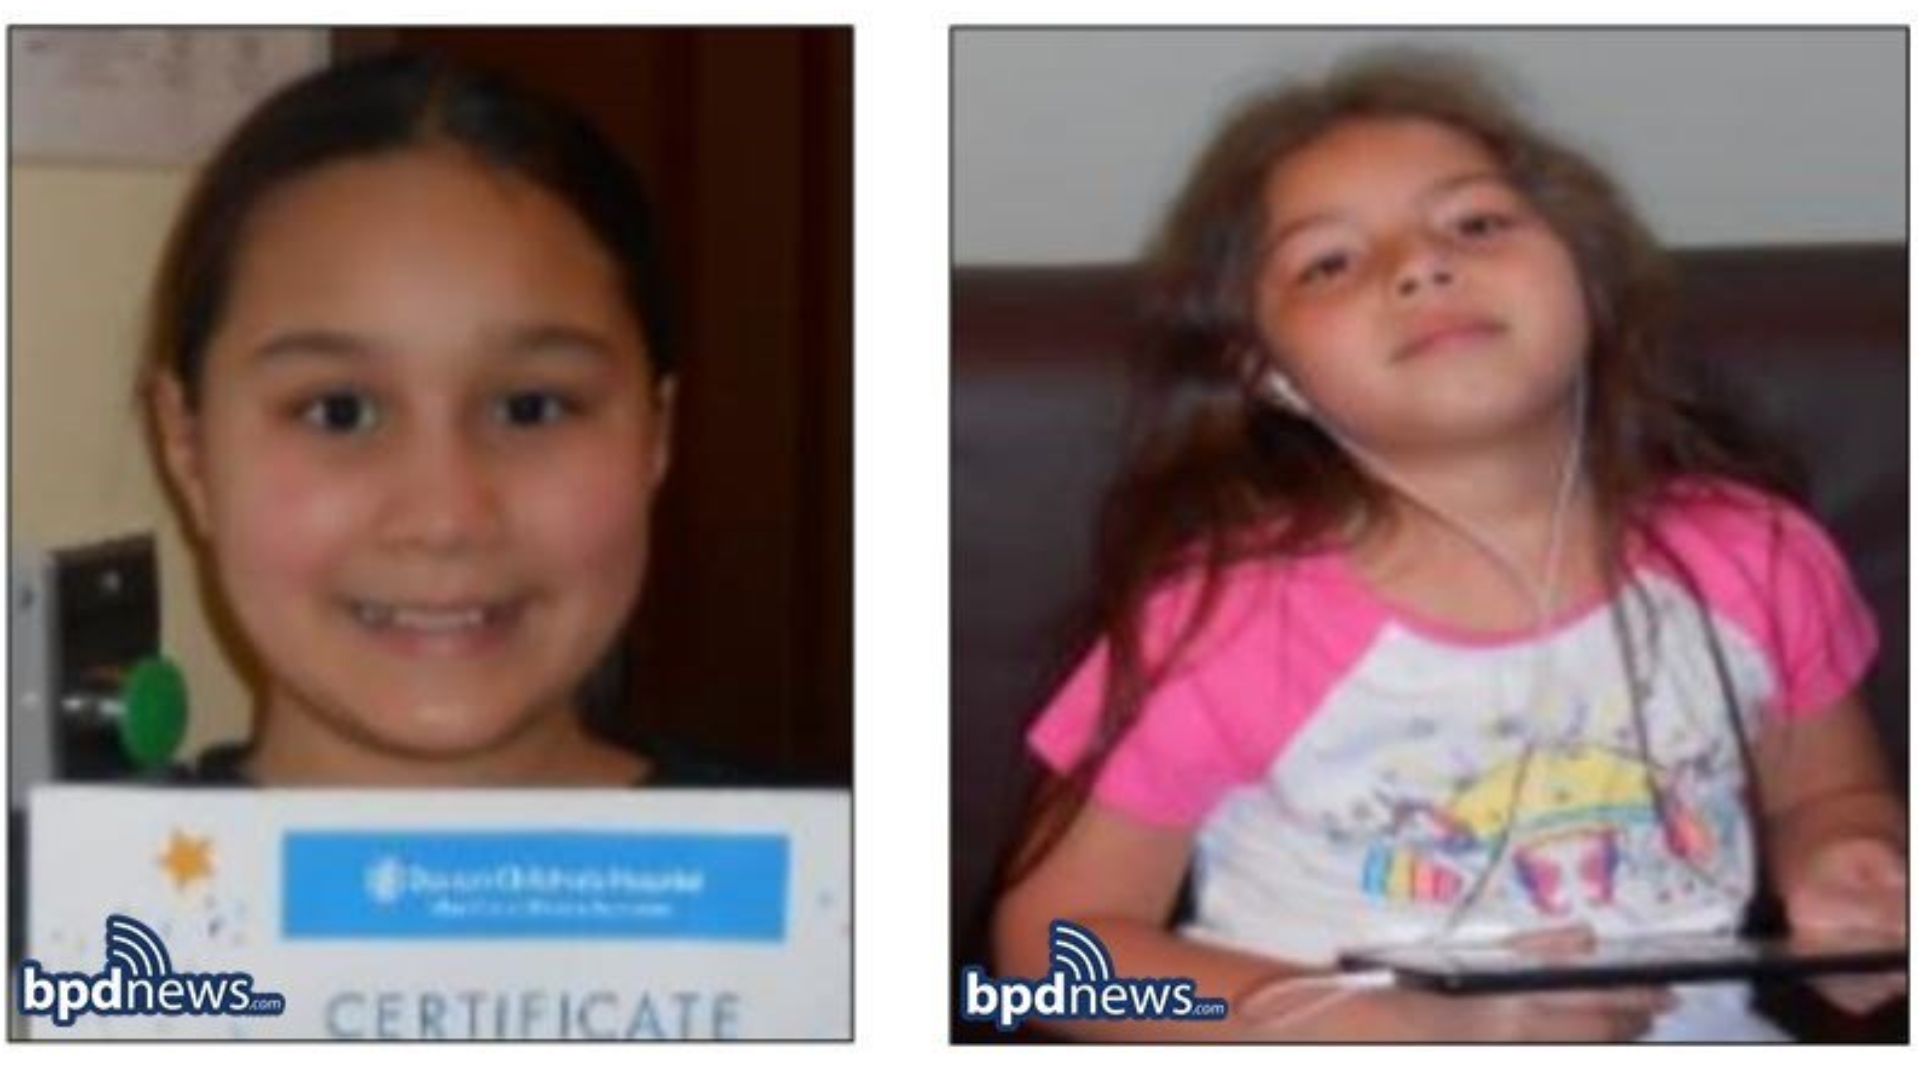 Boston Police Searching For Missing 9-Year-Old Leishmari Amill, 11-Year Old Champee Prasavath – CBS Boston